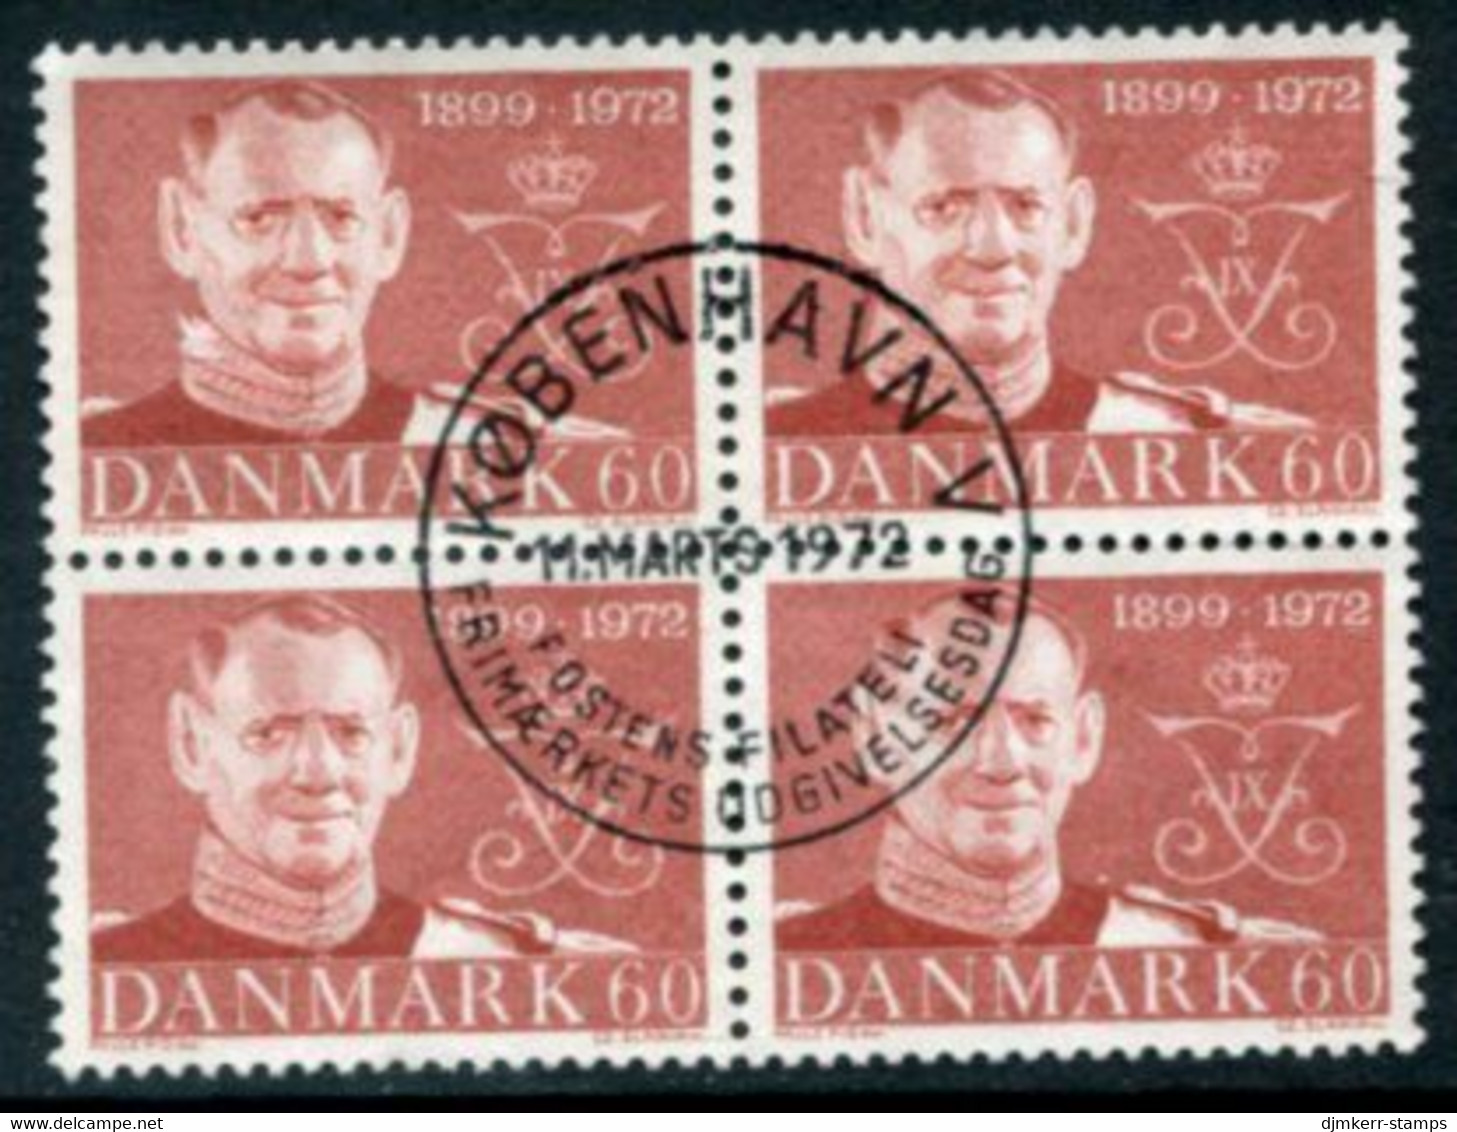 DENMARK 1972 King's 75th Birthday Block Of 4 Used   Michel 520 - Used Stamps